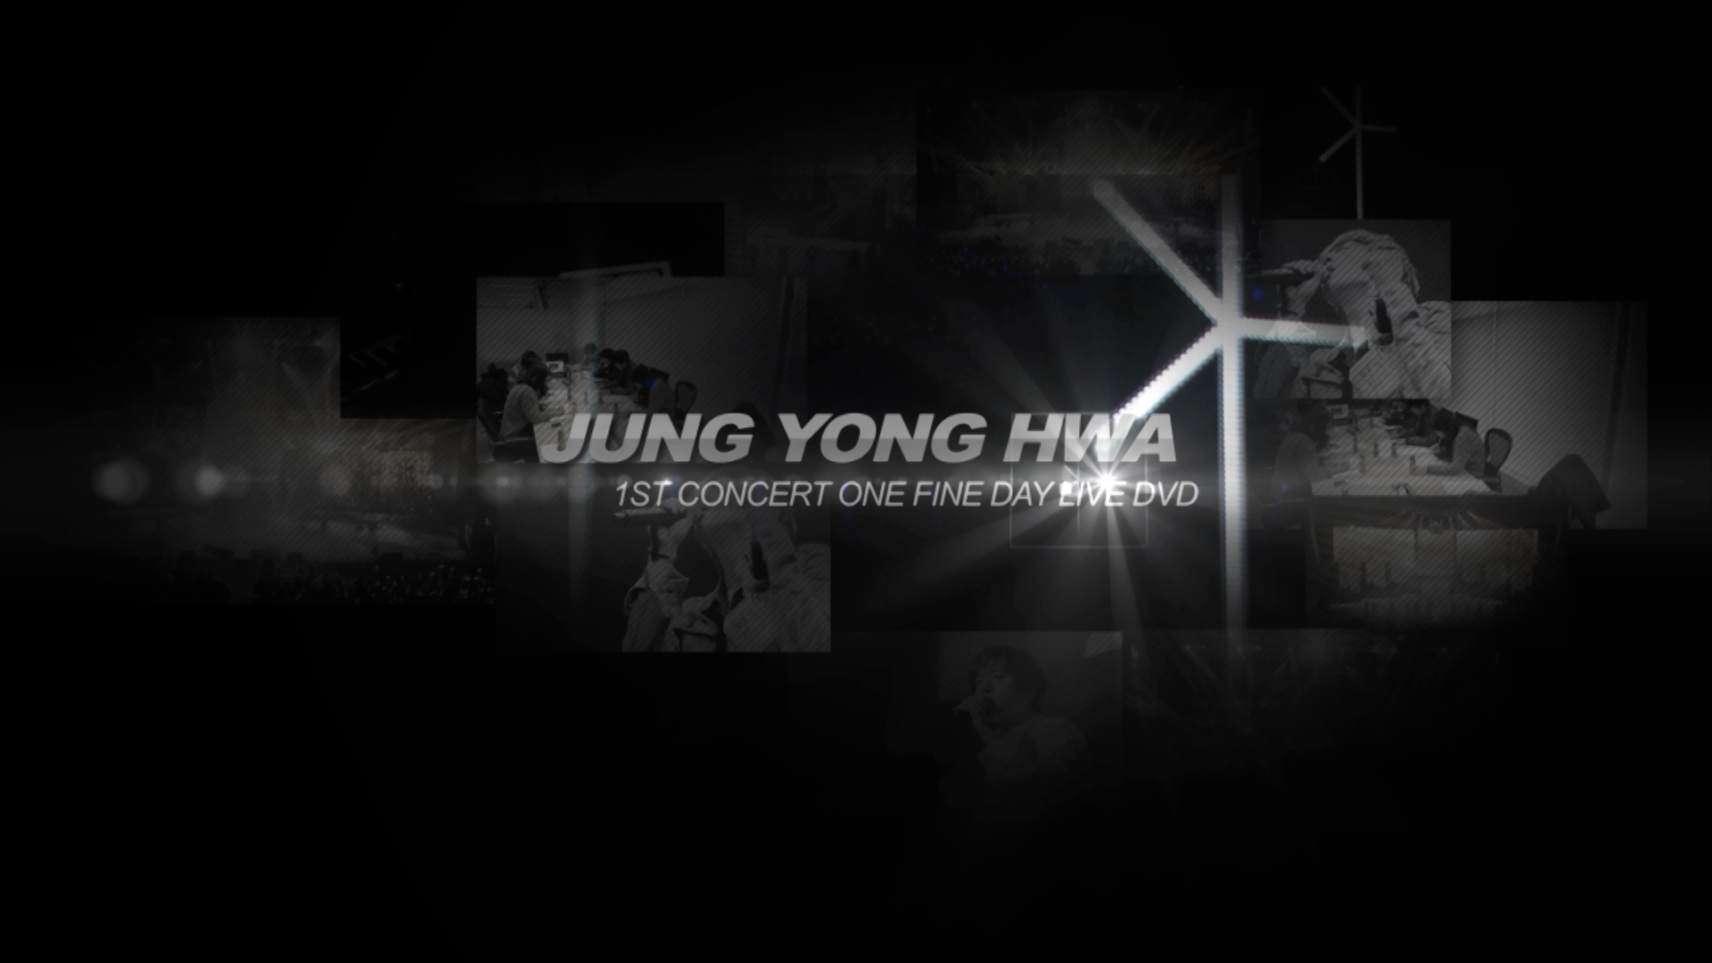 JUNG YONG HWA 1ST CONCERT DVD RELEASE VER1